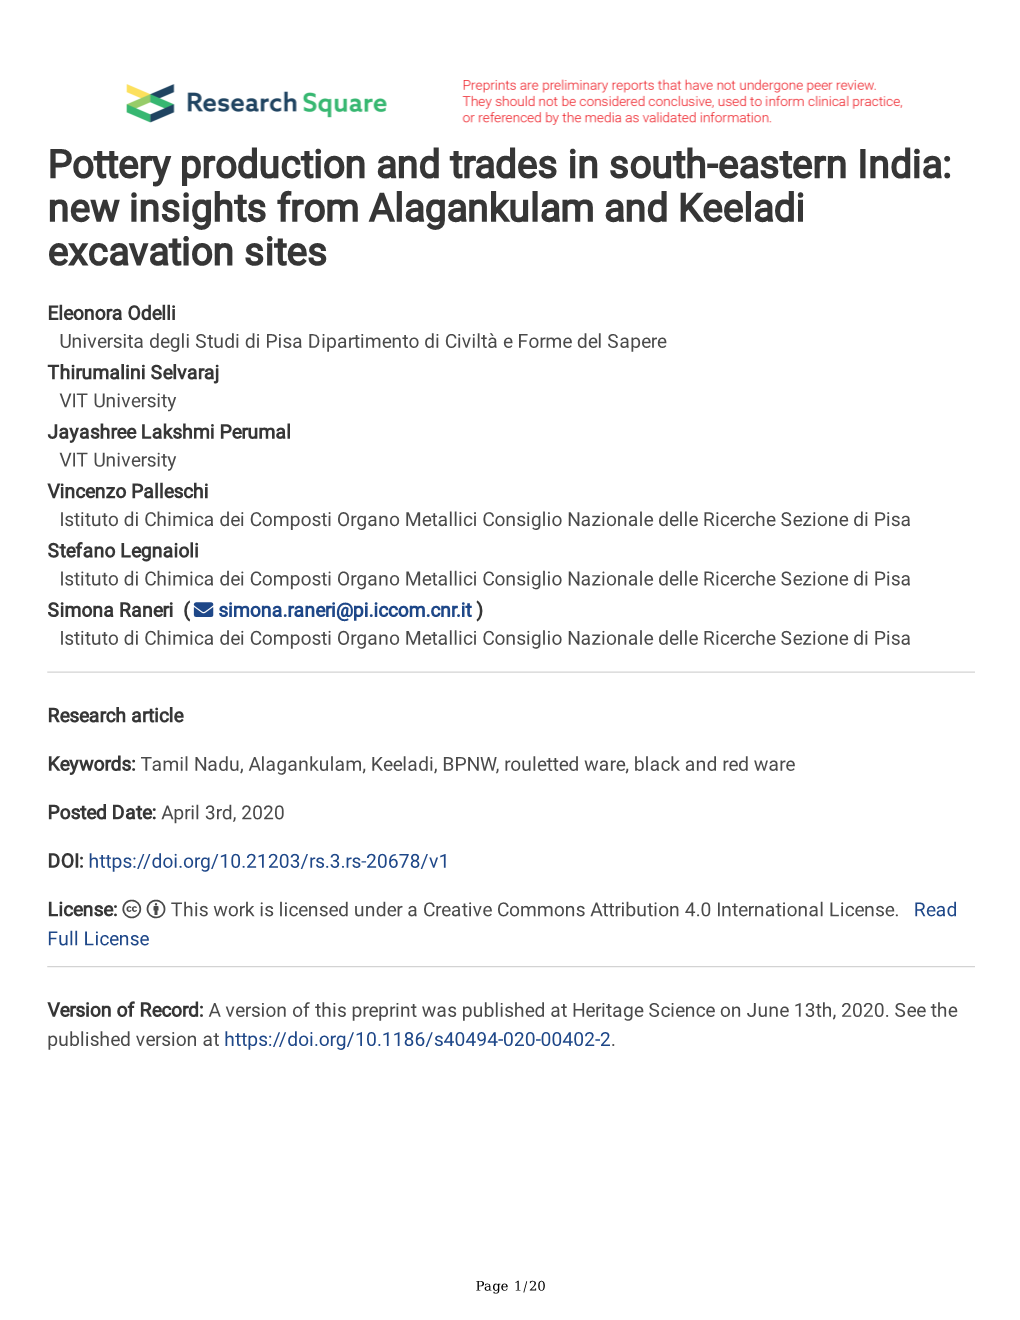 Pottery Production and Trades in South-Eastern India: New Insights from Alagankulam and Keeladi Excavation Sites